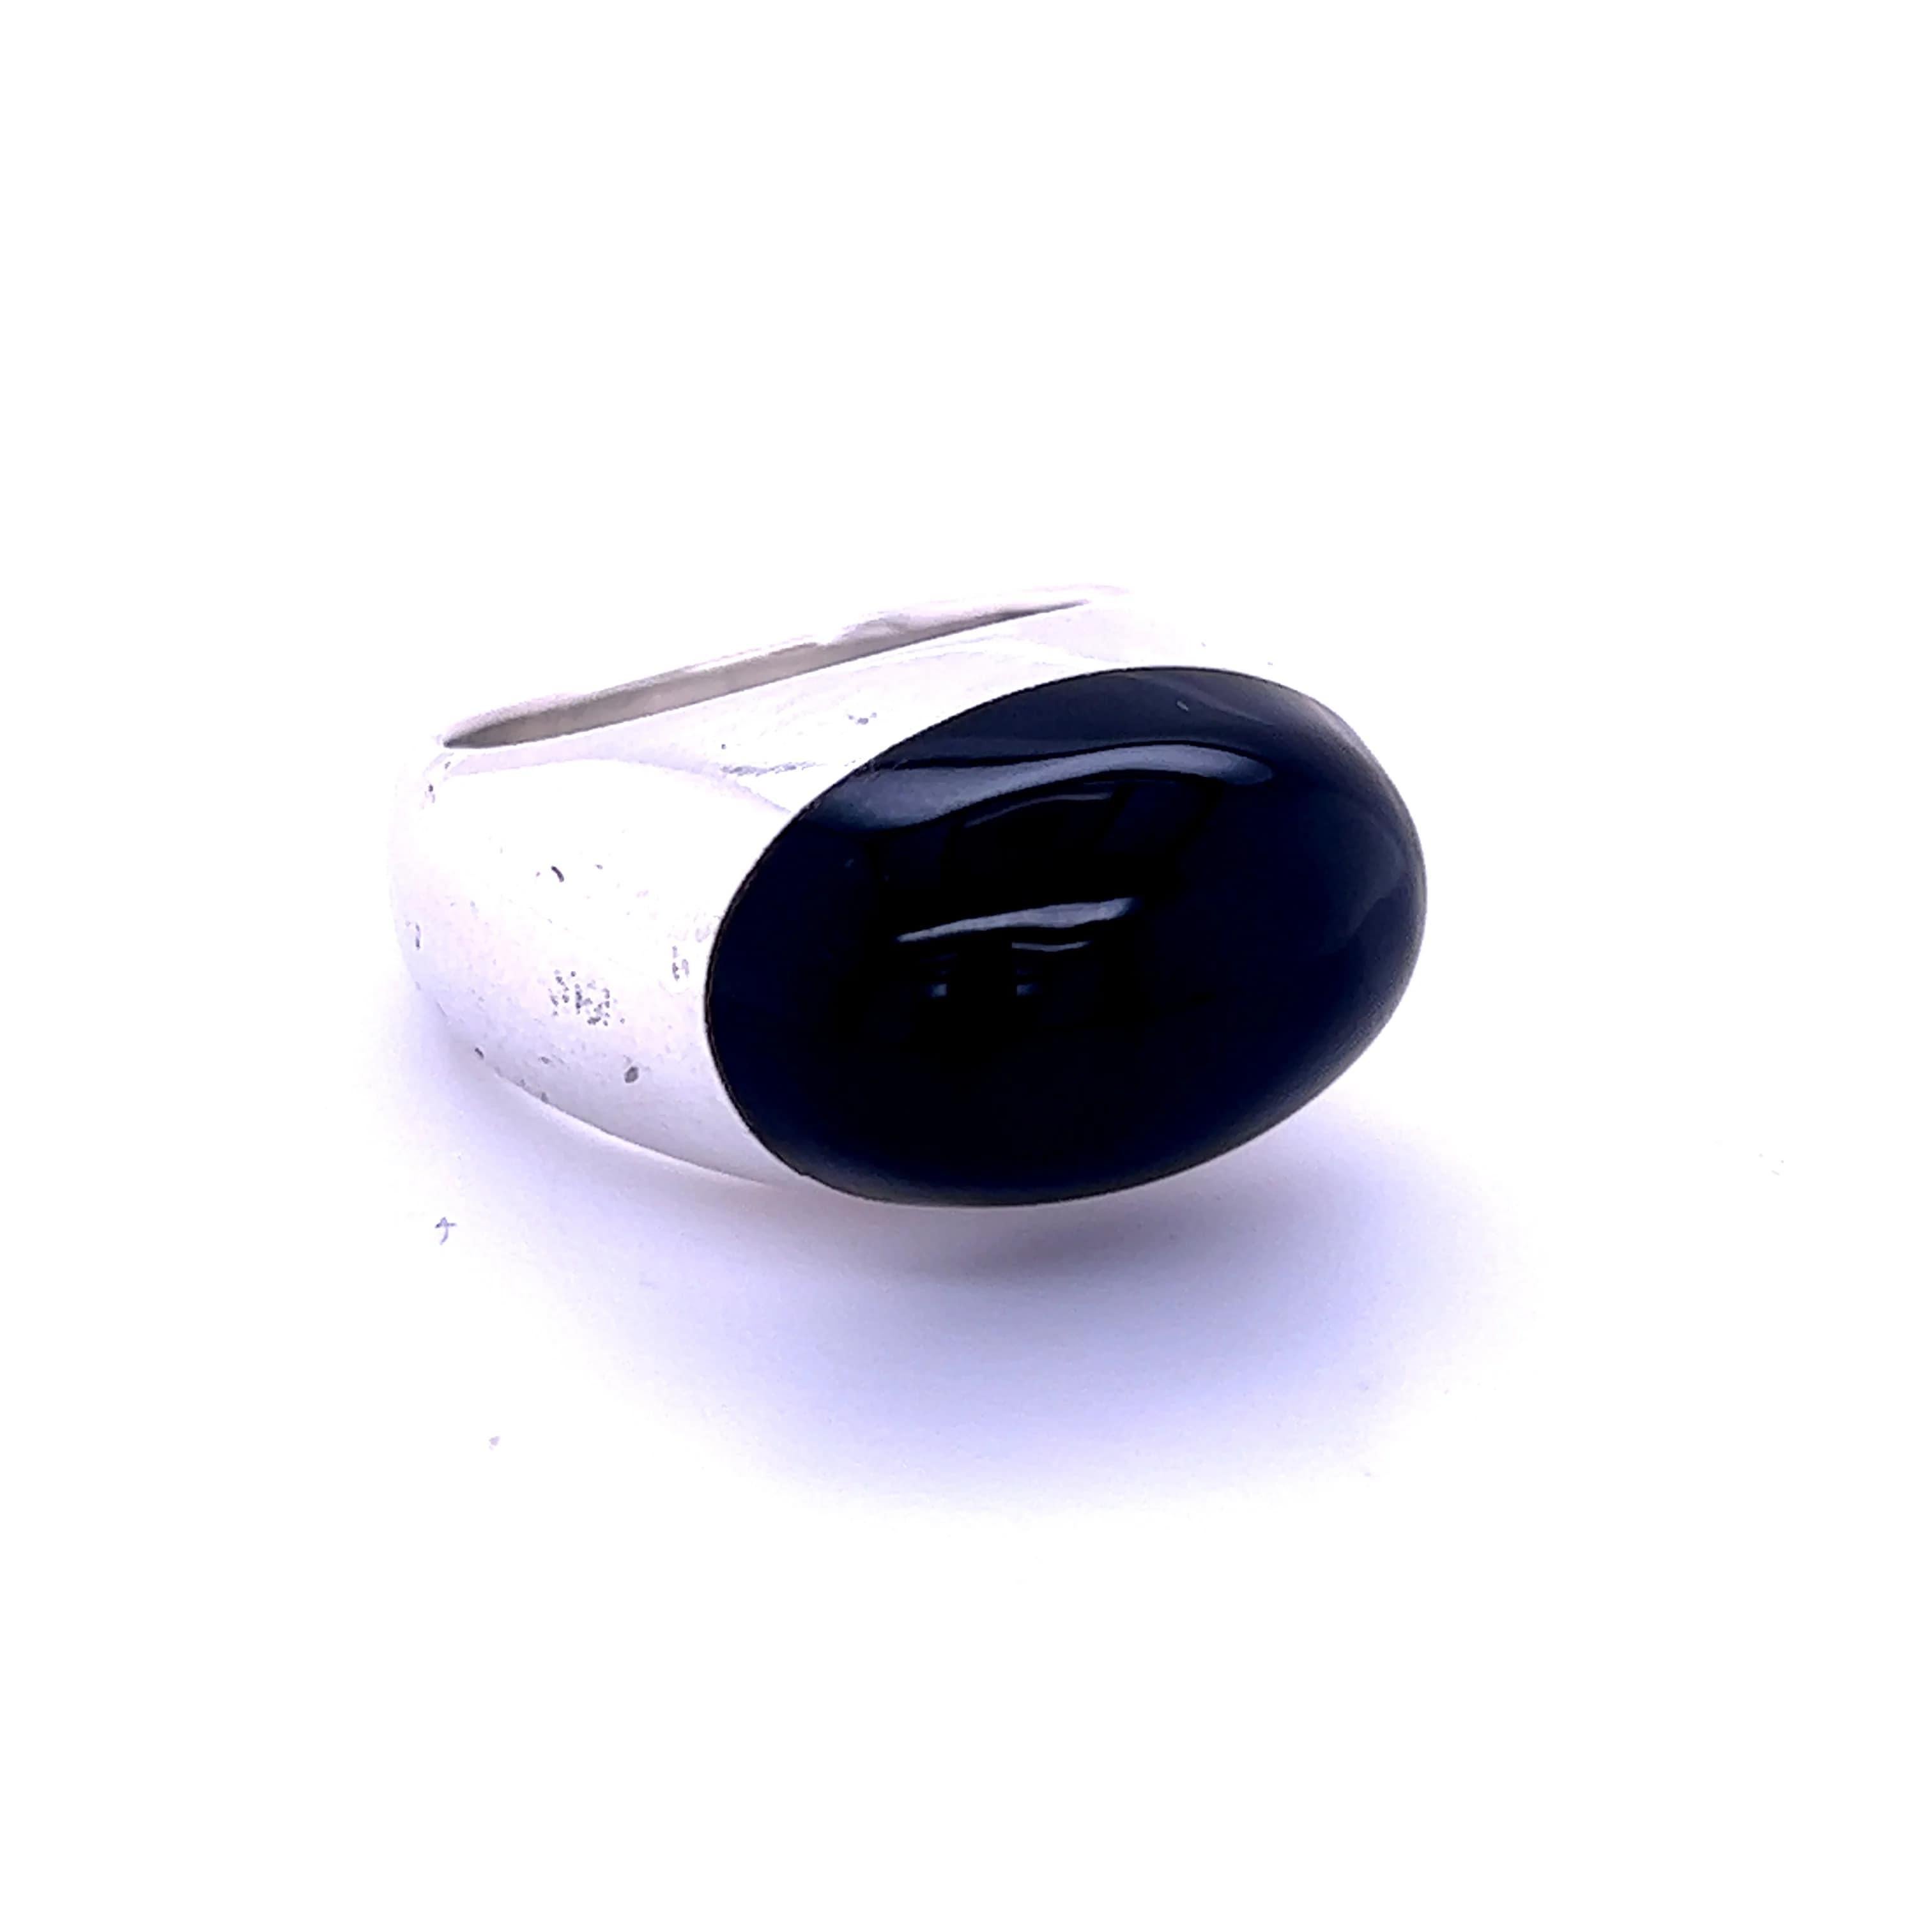 Authentic Gucci Estate Black Onyx Ring Size 6.75 Sterling Silver 6 mm G22

This elegant Authentic Gucci ring is made of sterling silver with a NEW ONYX  CABOCHON  stone and has a weight of 19 grams.

TRUSTED SELLER SINCE 2002

PLEASE SEE OUR